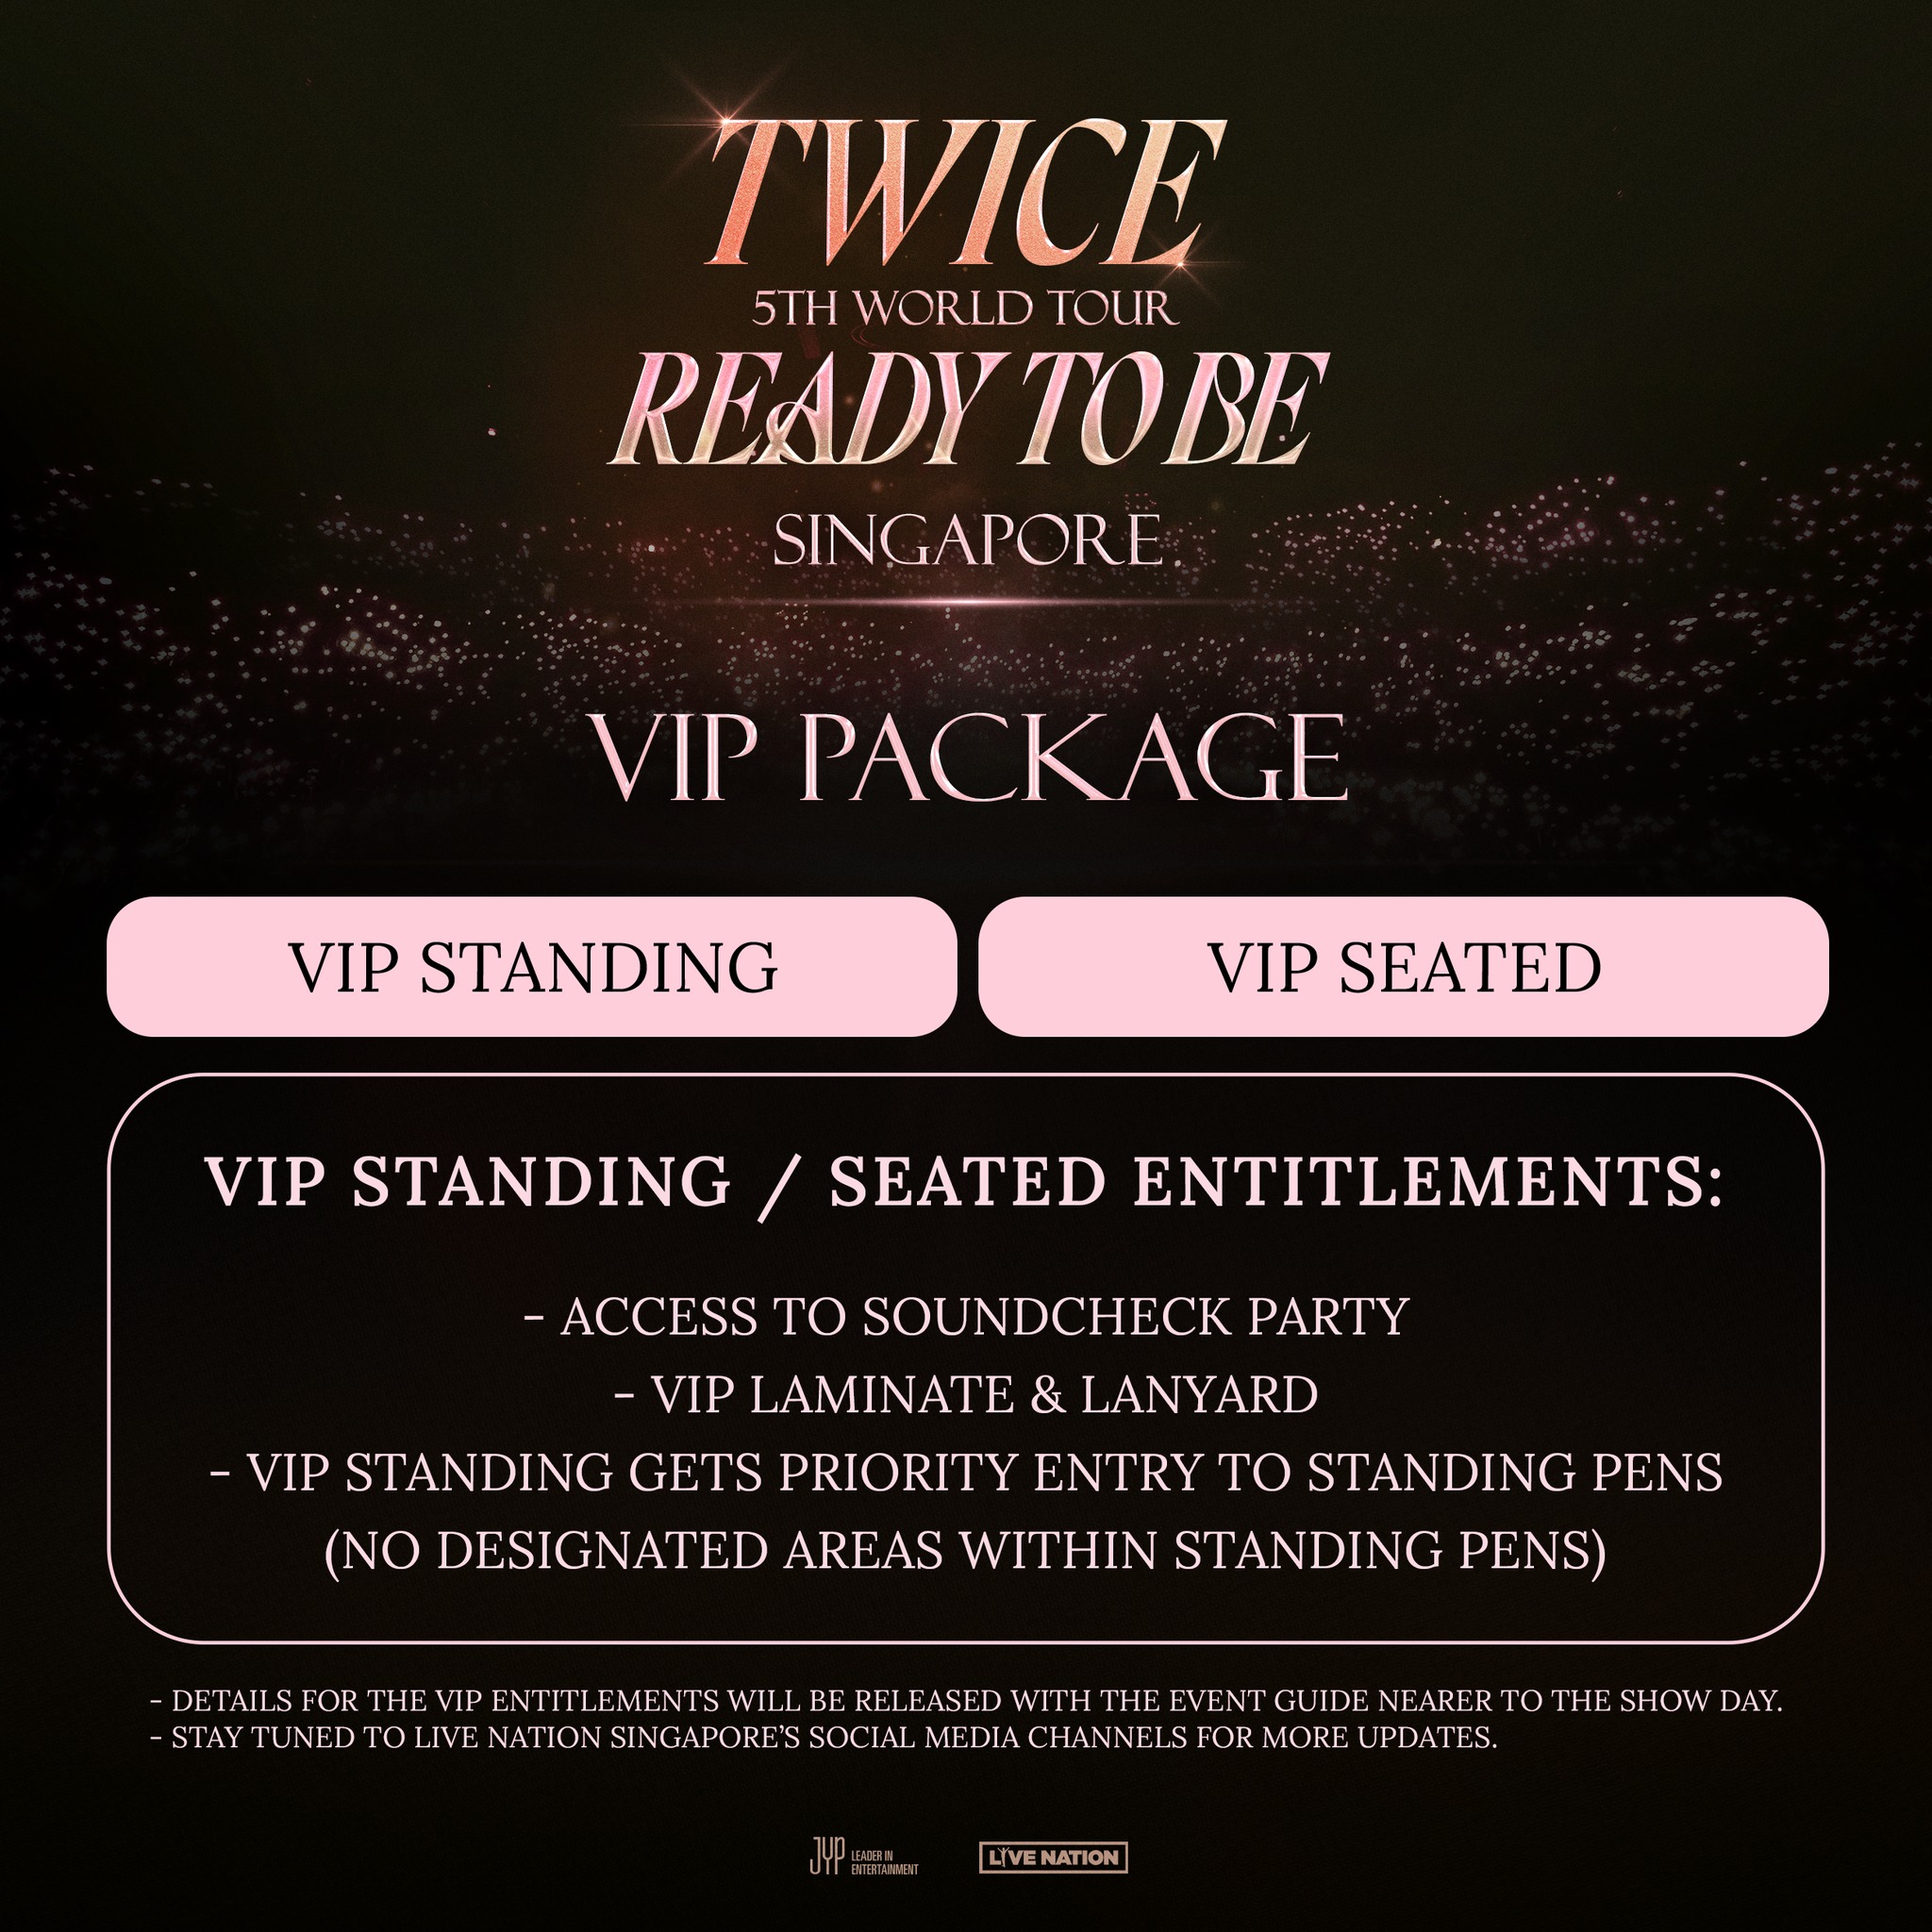 Twice 'Ready To Be' concert: Everything you need to know